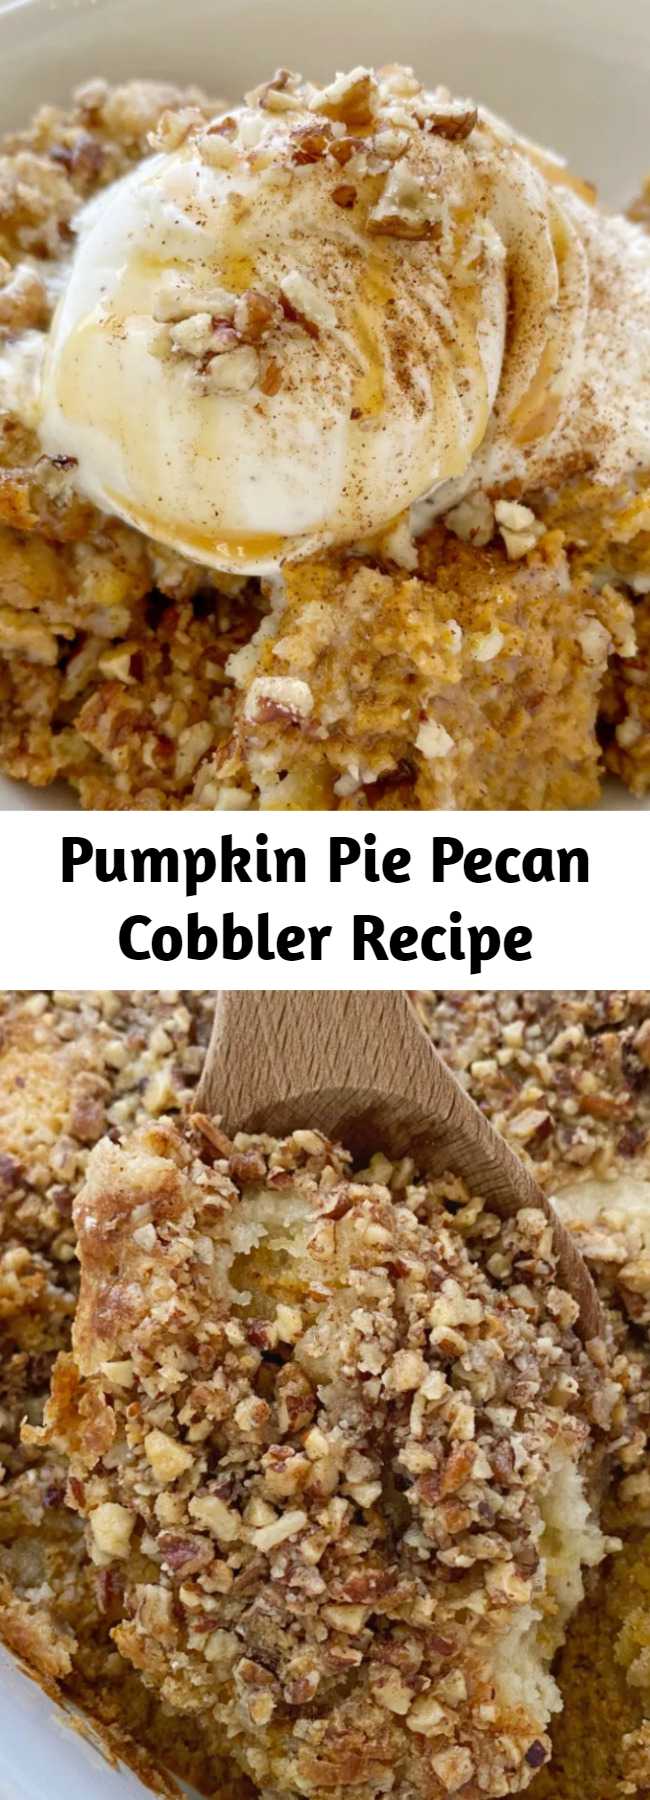 Pumpkin Pie Pecan Cobbler Recipe - Pumpkin Pie Pecan Cobbler has a creamy pumpkin pie layer topped with a sweet spiced pecan crumble topping. Serve with a scoop of vanilla ice cream for the best pumpkin cobbler recipe that's perfect for Fall.